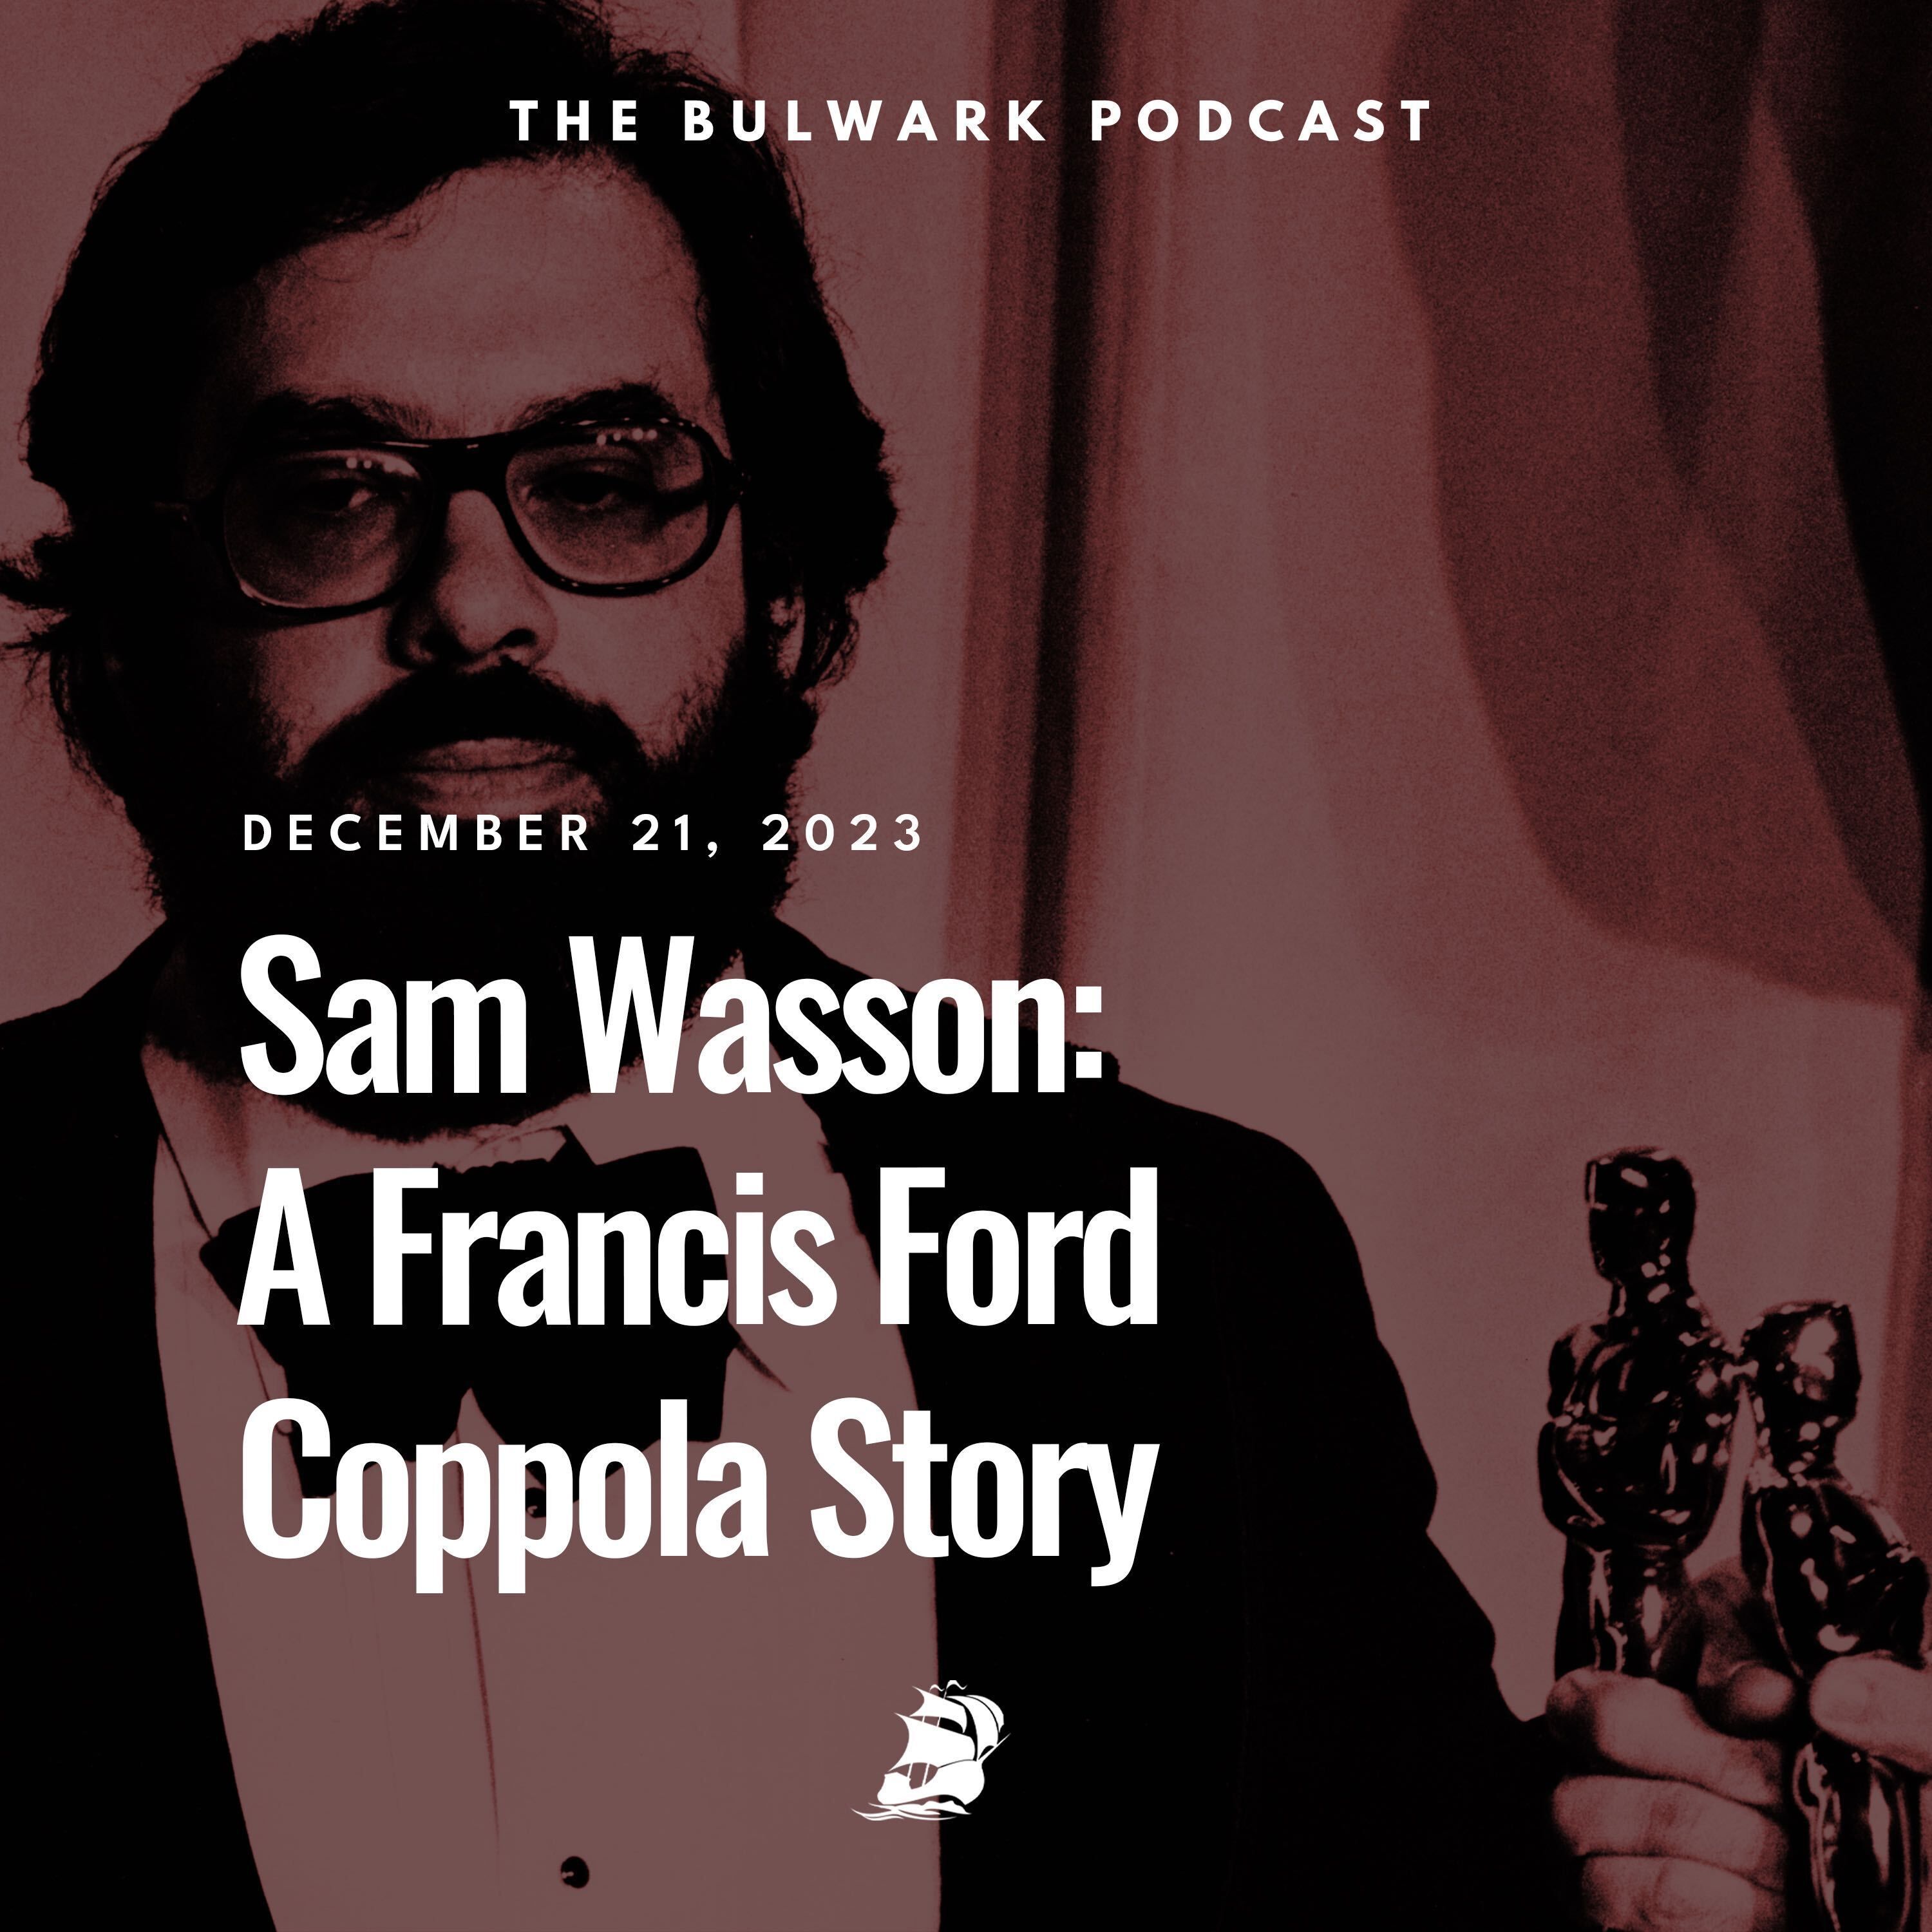 Sam Wasson: A Francis Ford Coppola Story by The Bulwark Podcast